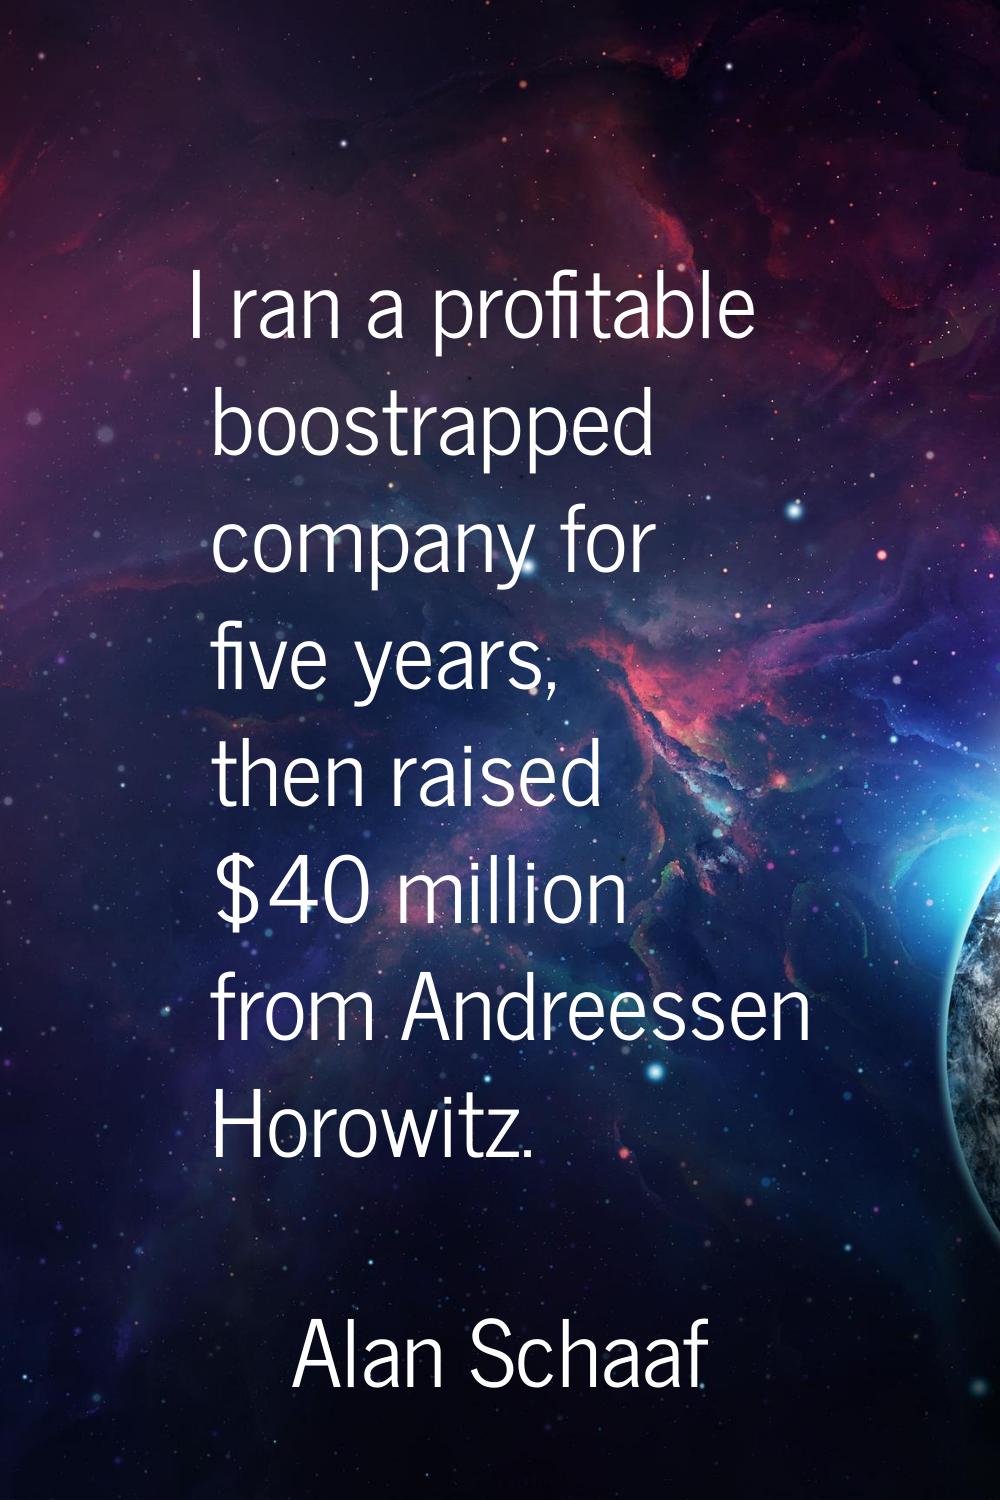 I ran a profitable boostrapped company for five years, then raised $40 million from Andreessen Horo